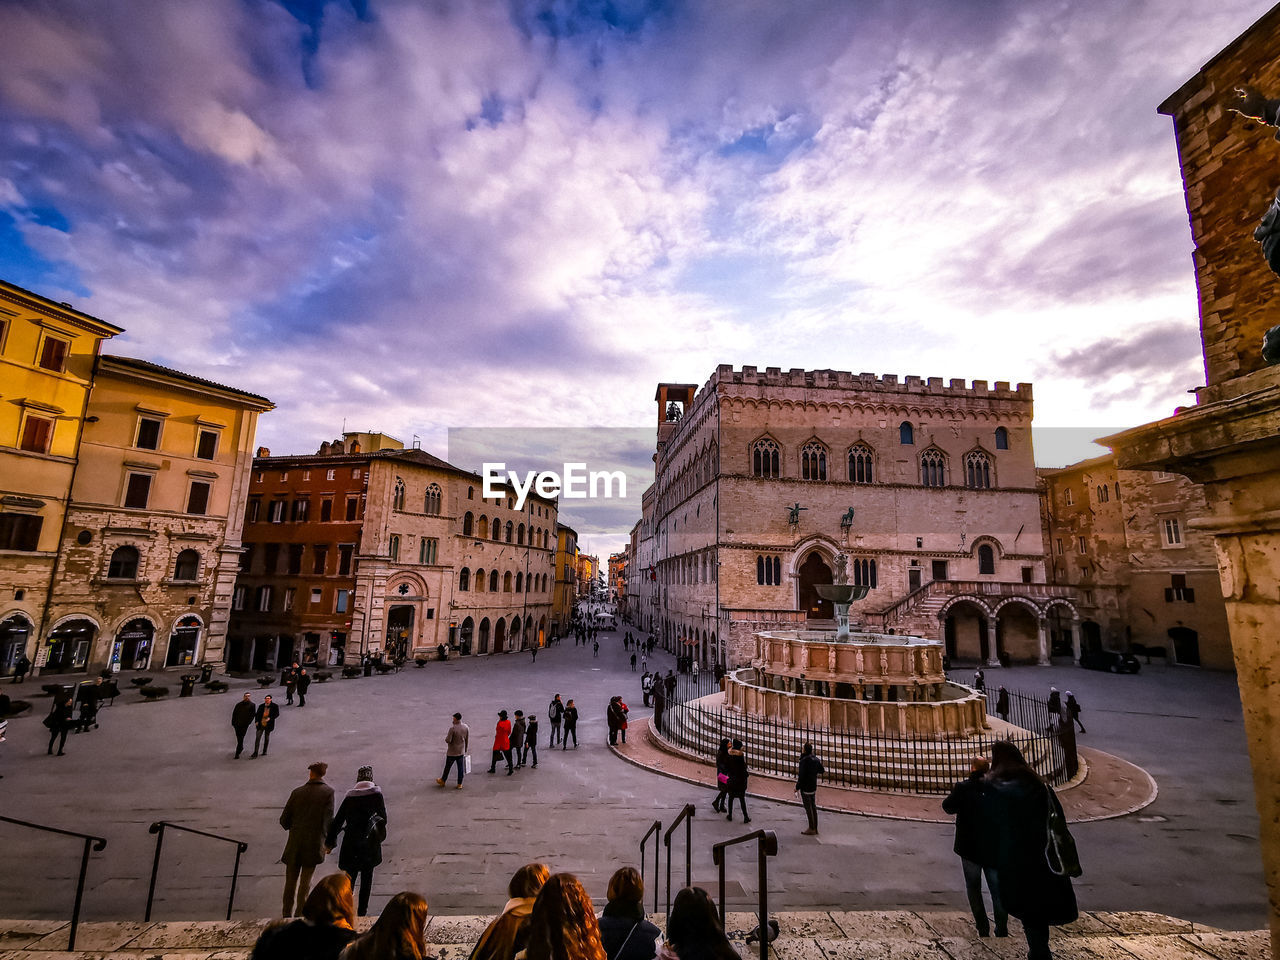 Group of people in front of buildings in perugia iv novembre square 